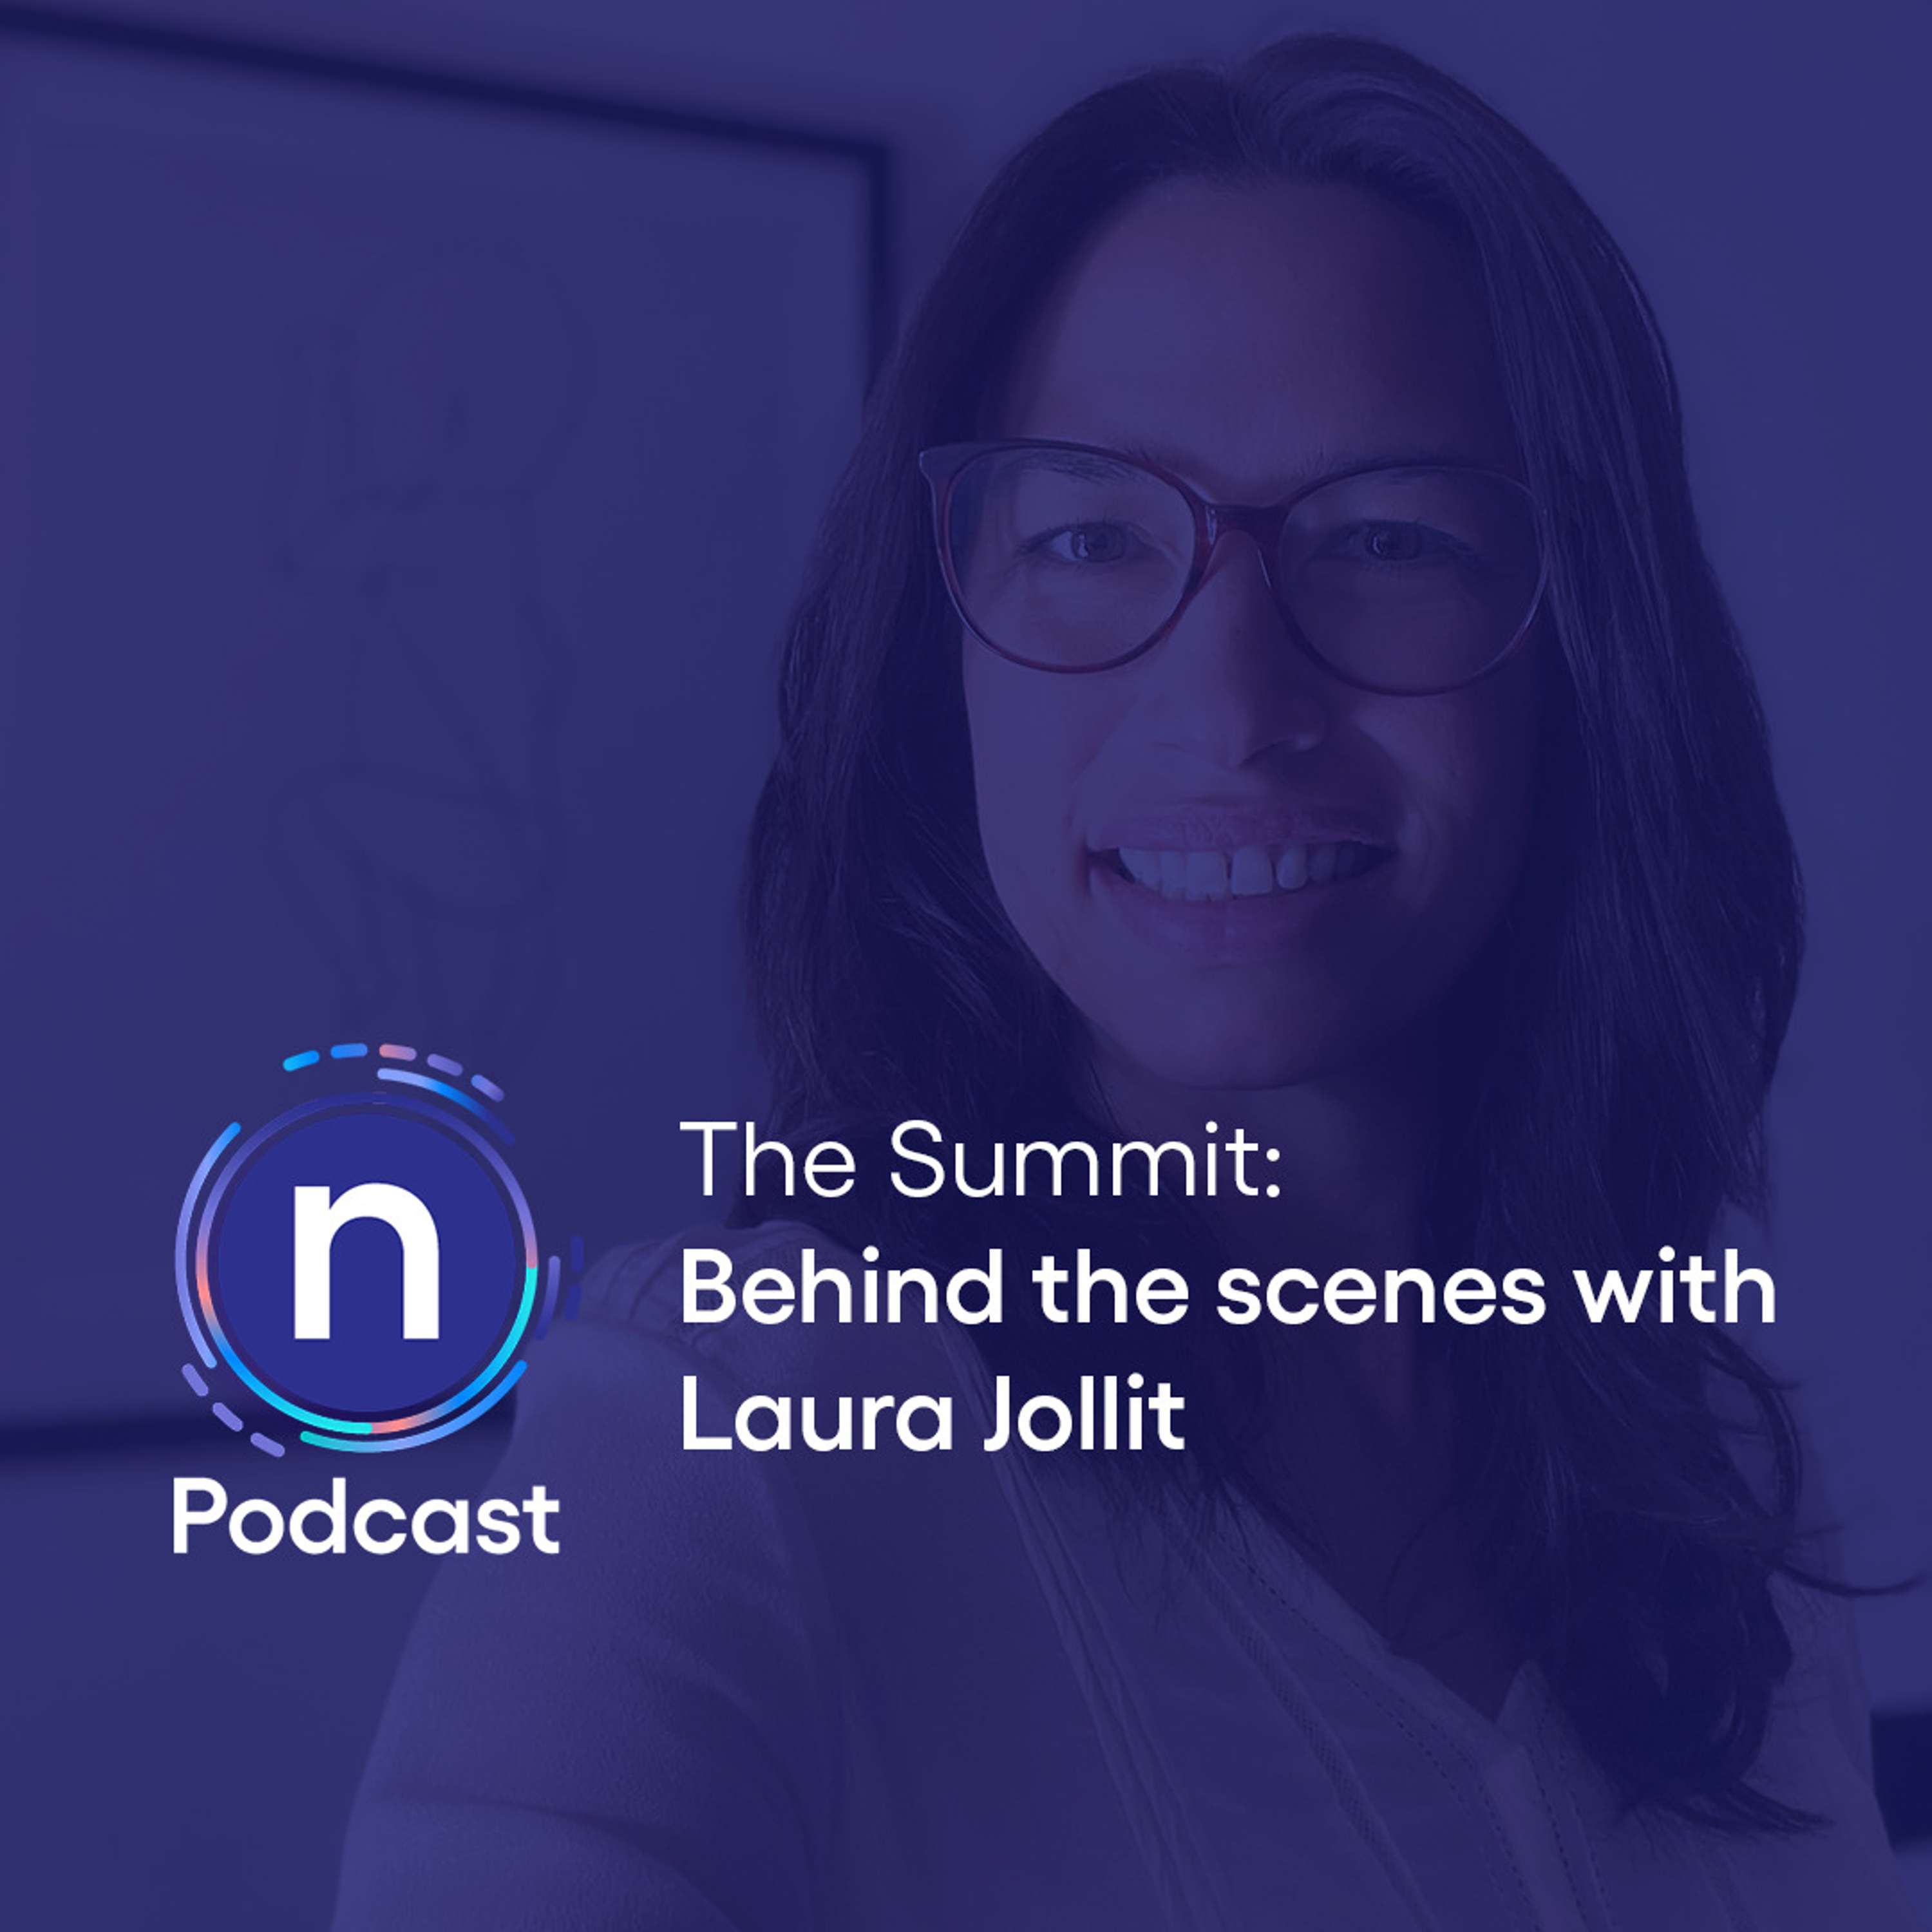 The Summit: behind the scenes with Laura Jollit